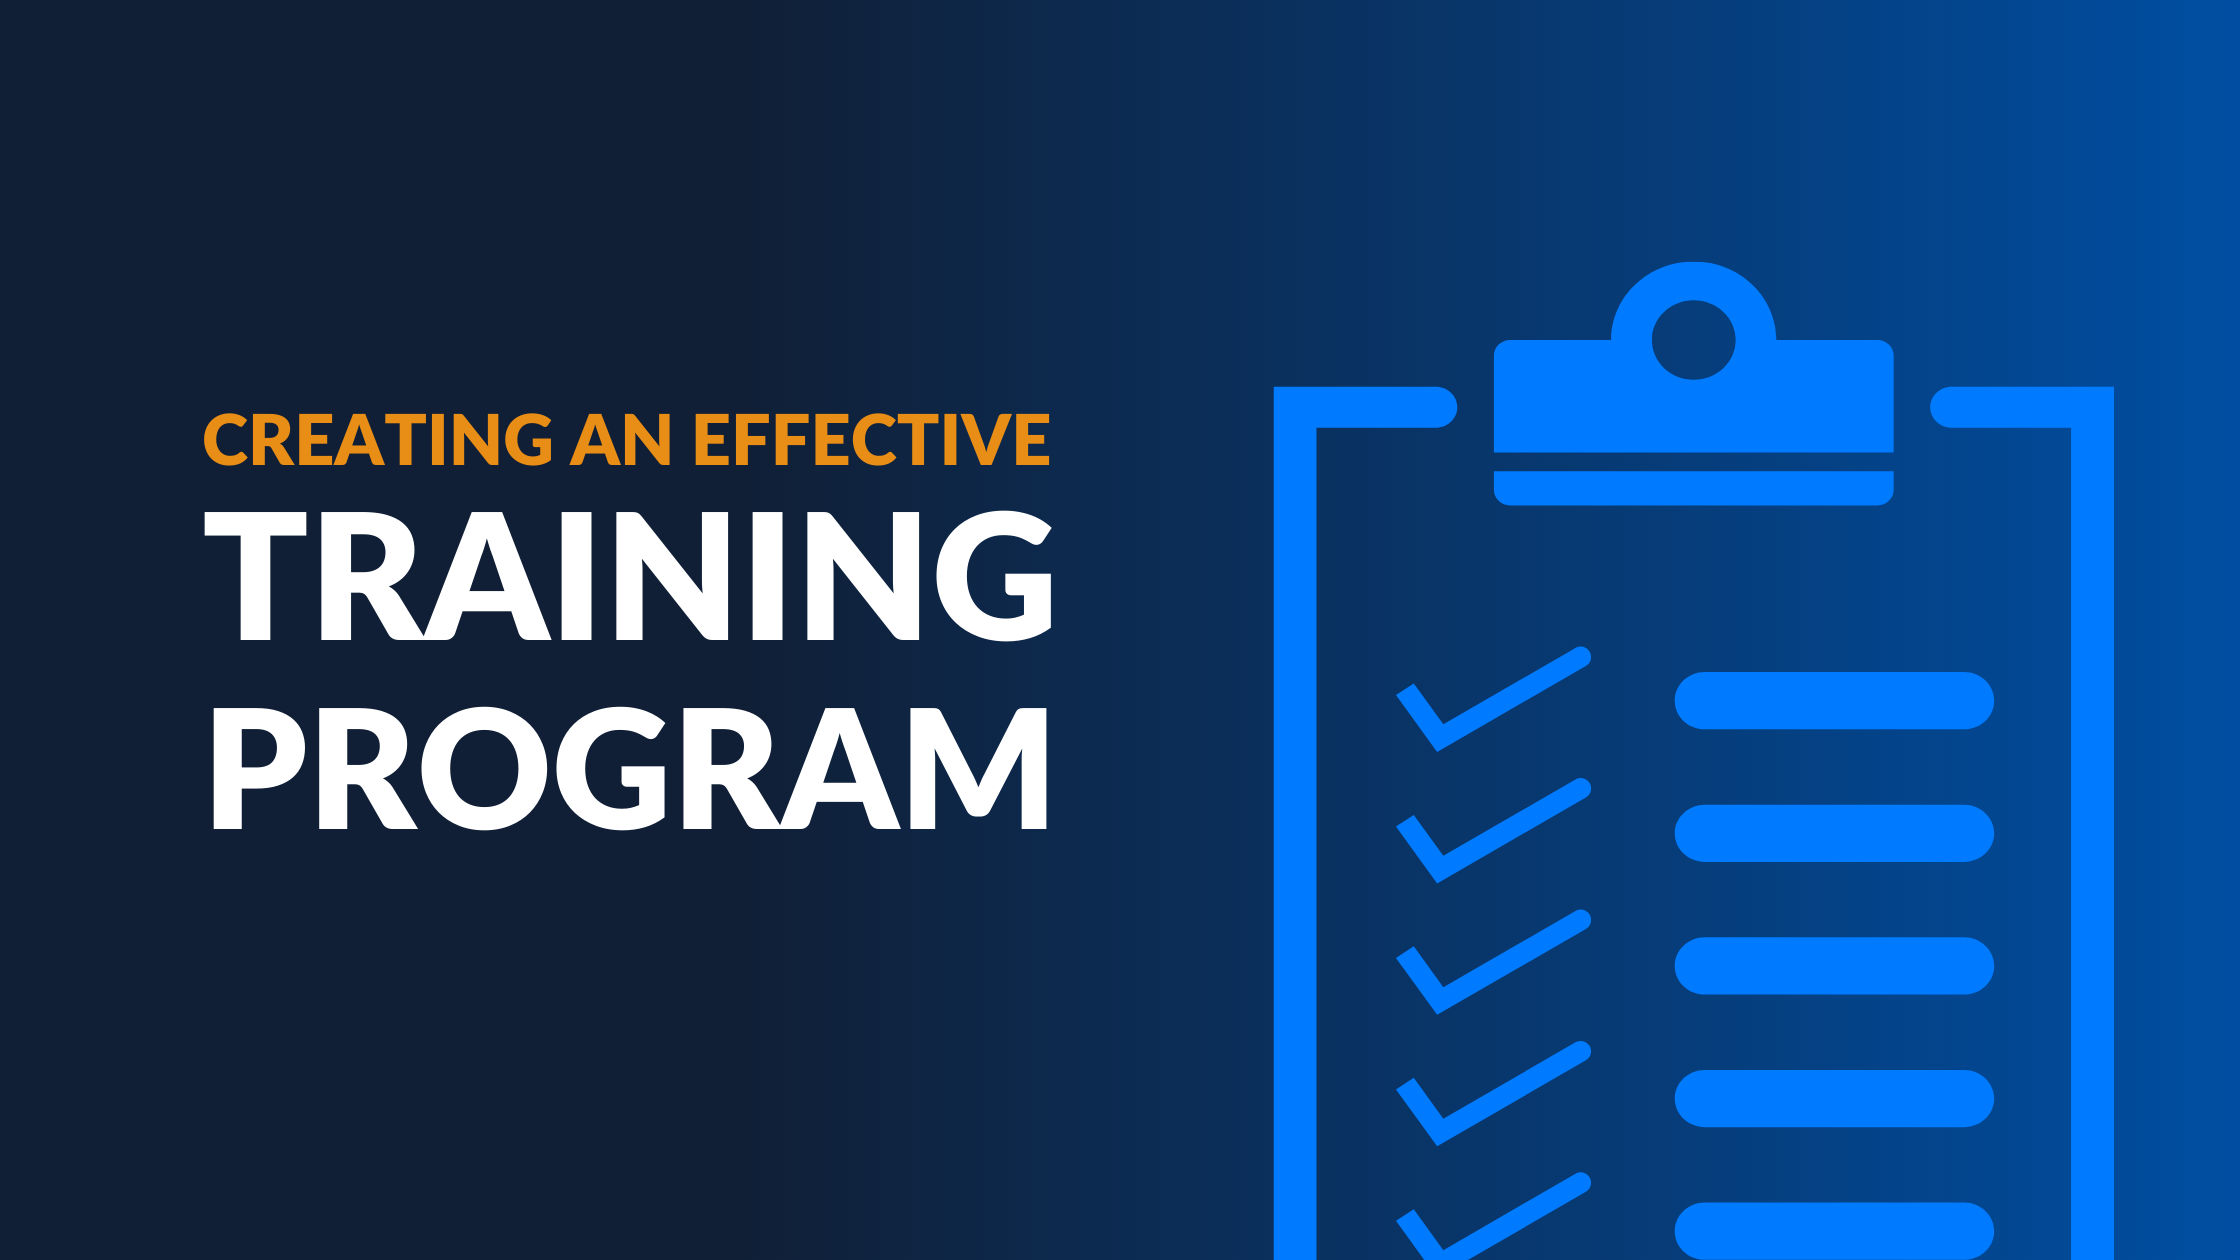 https://image.lorman.com/article/blog/104_Creating%20a%20Training%20Program%207%20Steps%20to%20Developing%20Stronger%20Employees.png